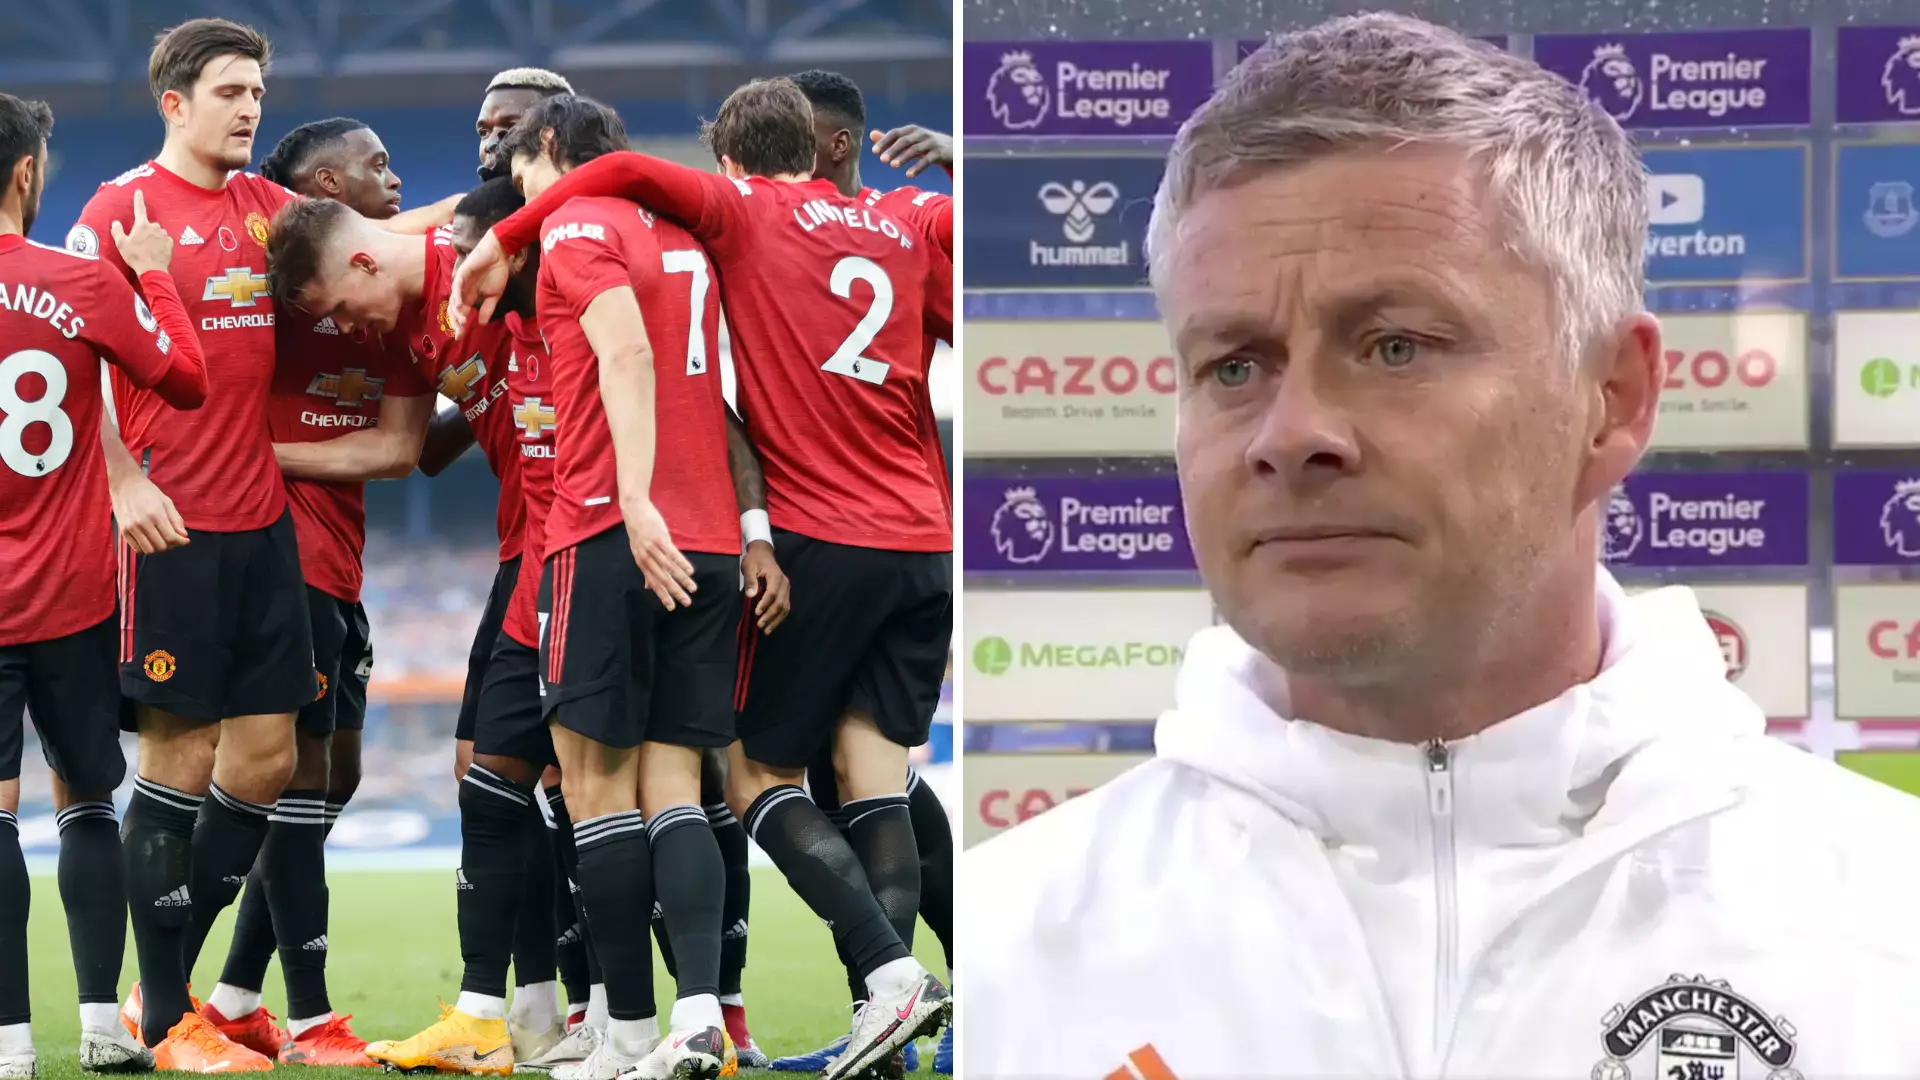 Ole Gunnar Solskjaer Claims Manchester United Were 'Set Up To Fail' In Extraordinary Post-Match Interview